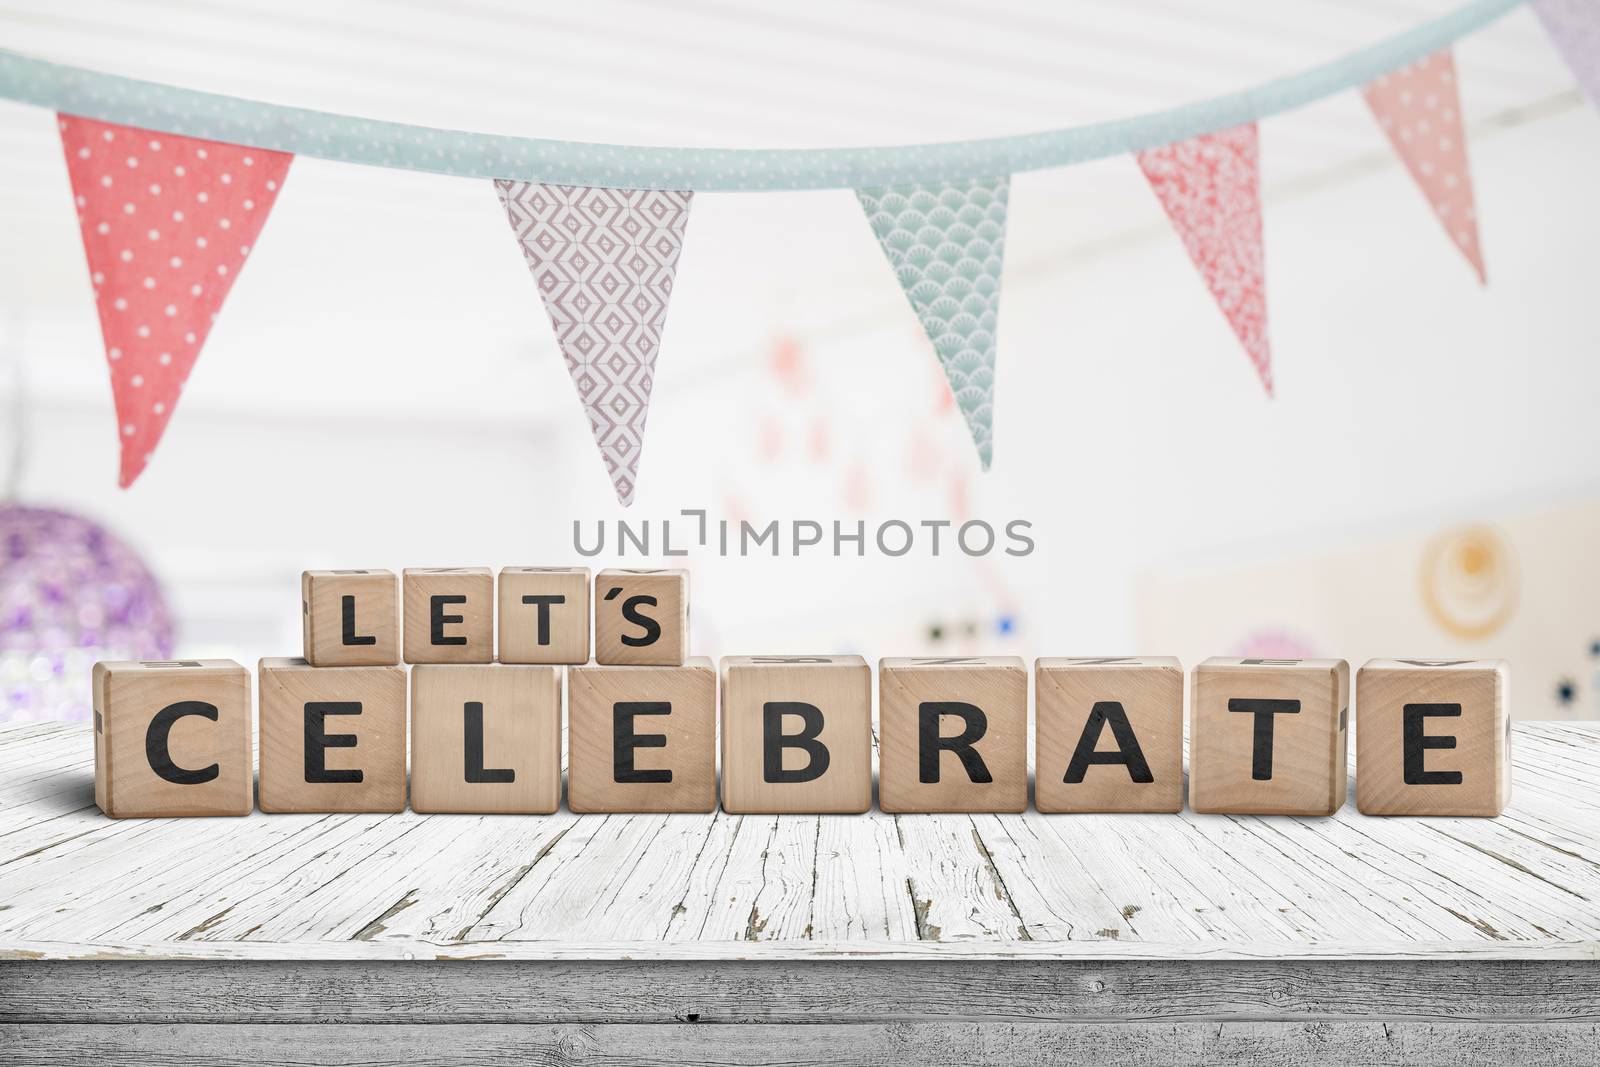 Let's celebrate birthday greeting in a bright kids room by Sportactive